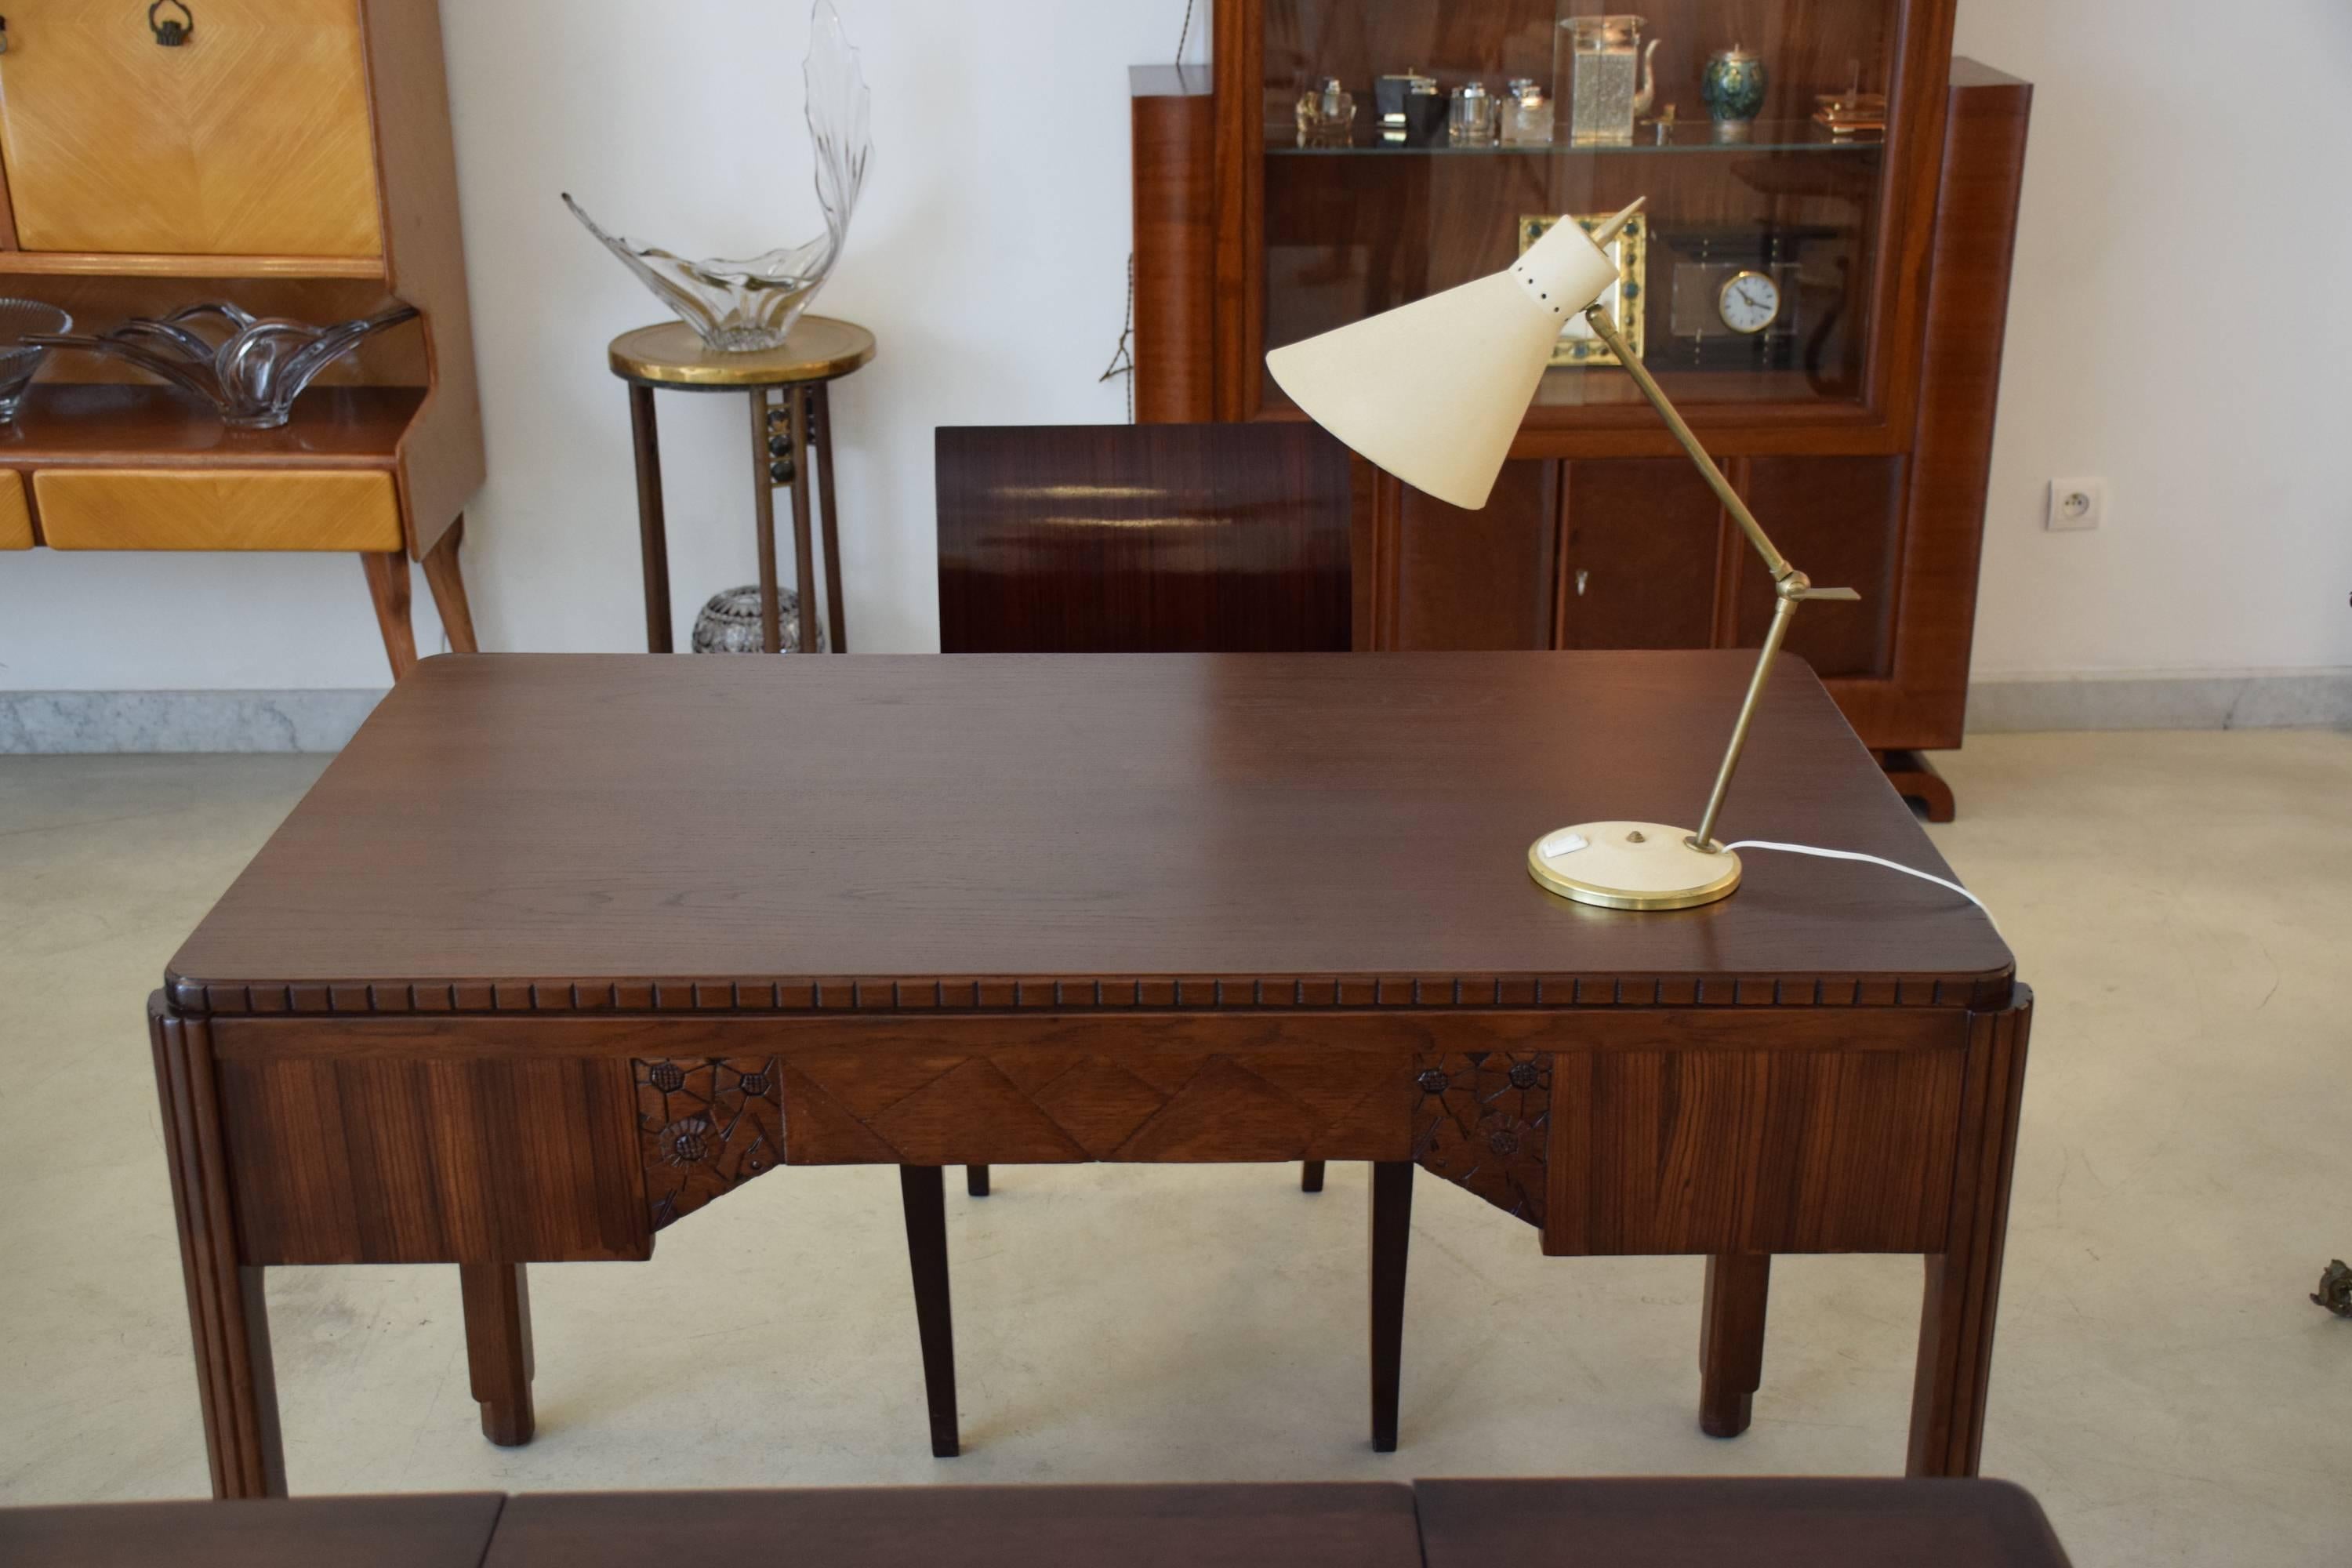 A stunning 20th Century Art Deco desk with a solid oak top, legs, drawers and zebrano veneer. The desk has beautiful sculpted flower details at the back, fluted legs and brass key details on each drawer. 

All original pieces, apart from the backs